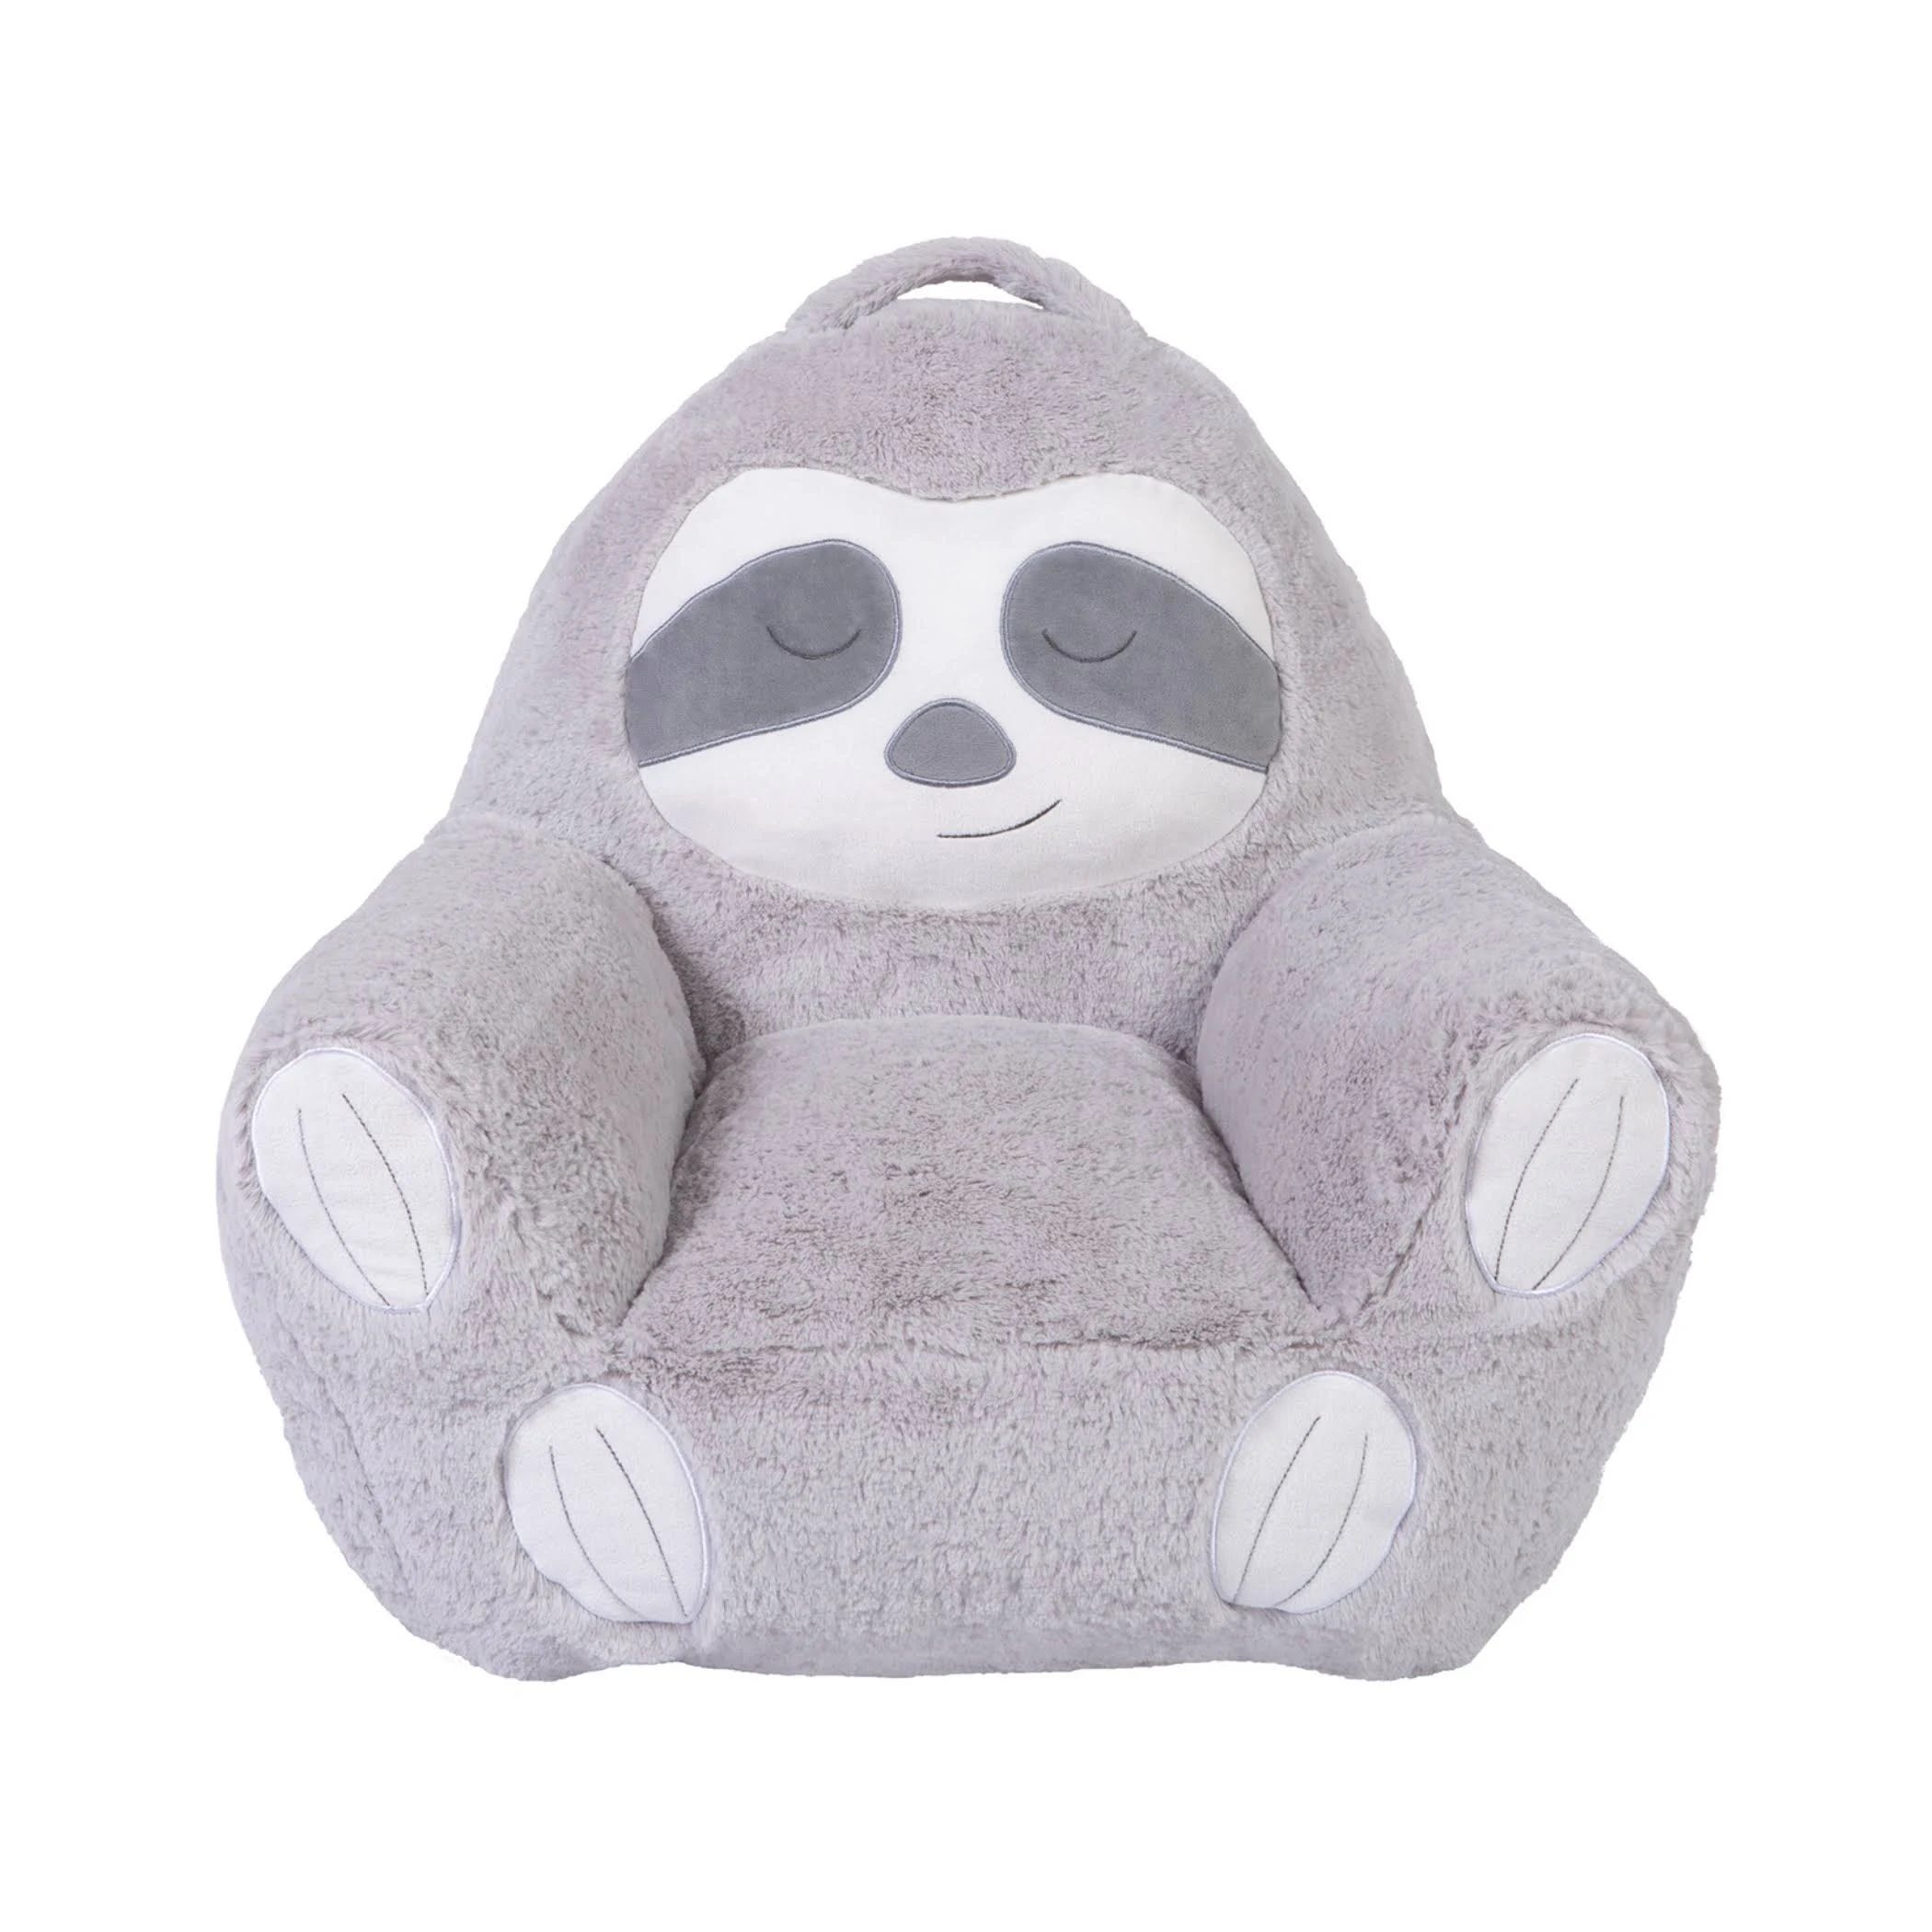 Sloth-Inspired Plush Kids Chair for Reading and Relaxing | Image